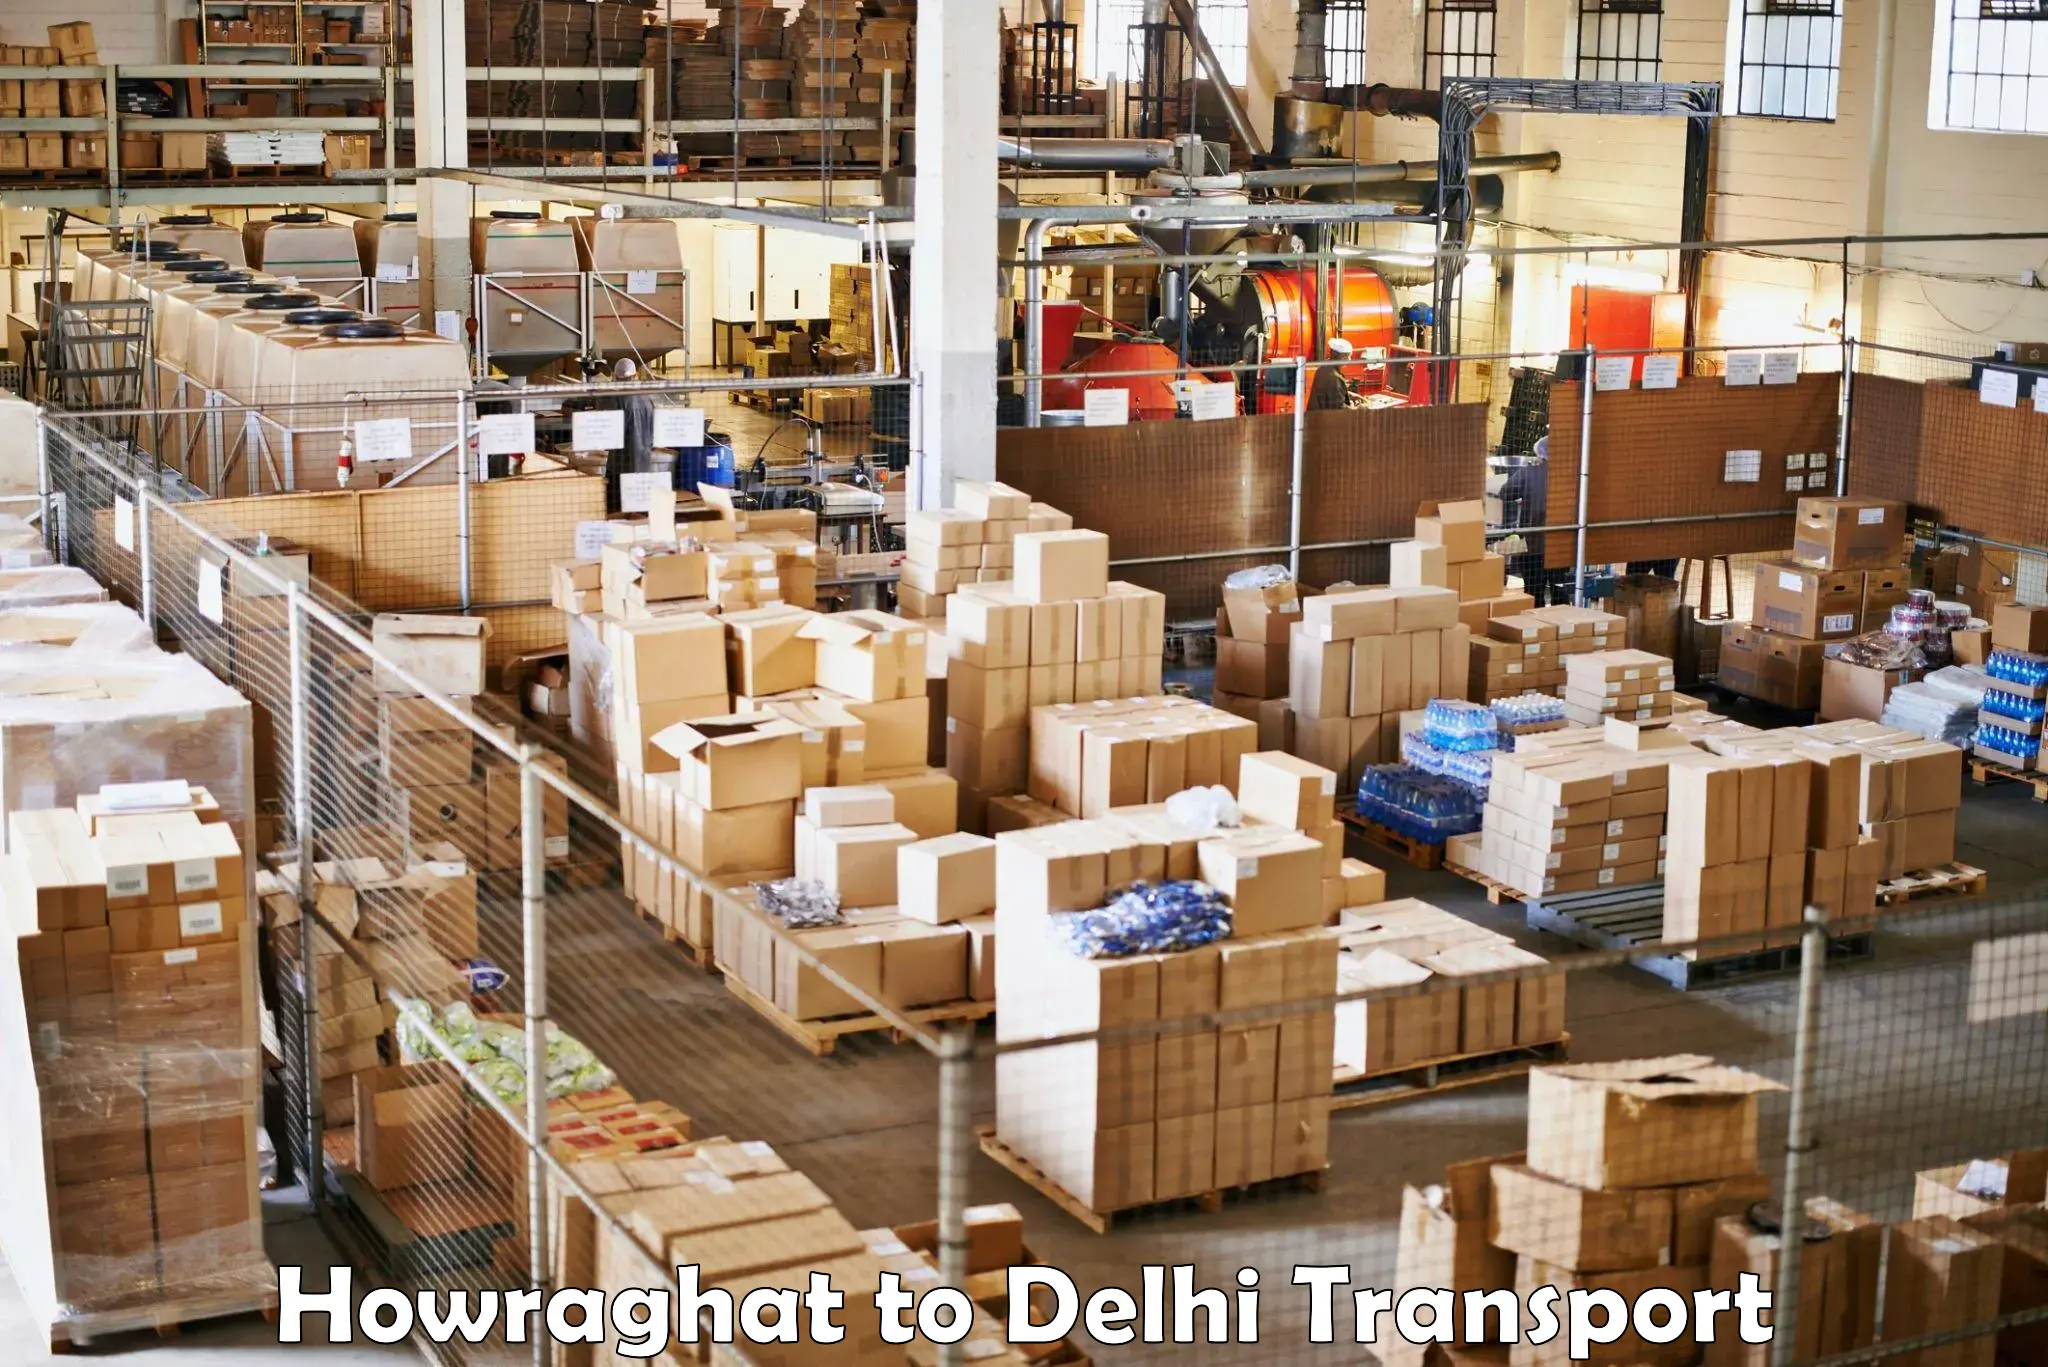 Lorry transport service Howraghat to East Delhi